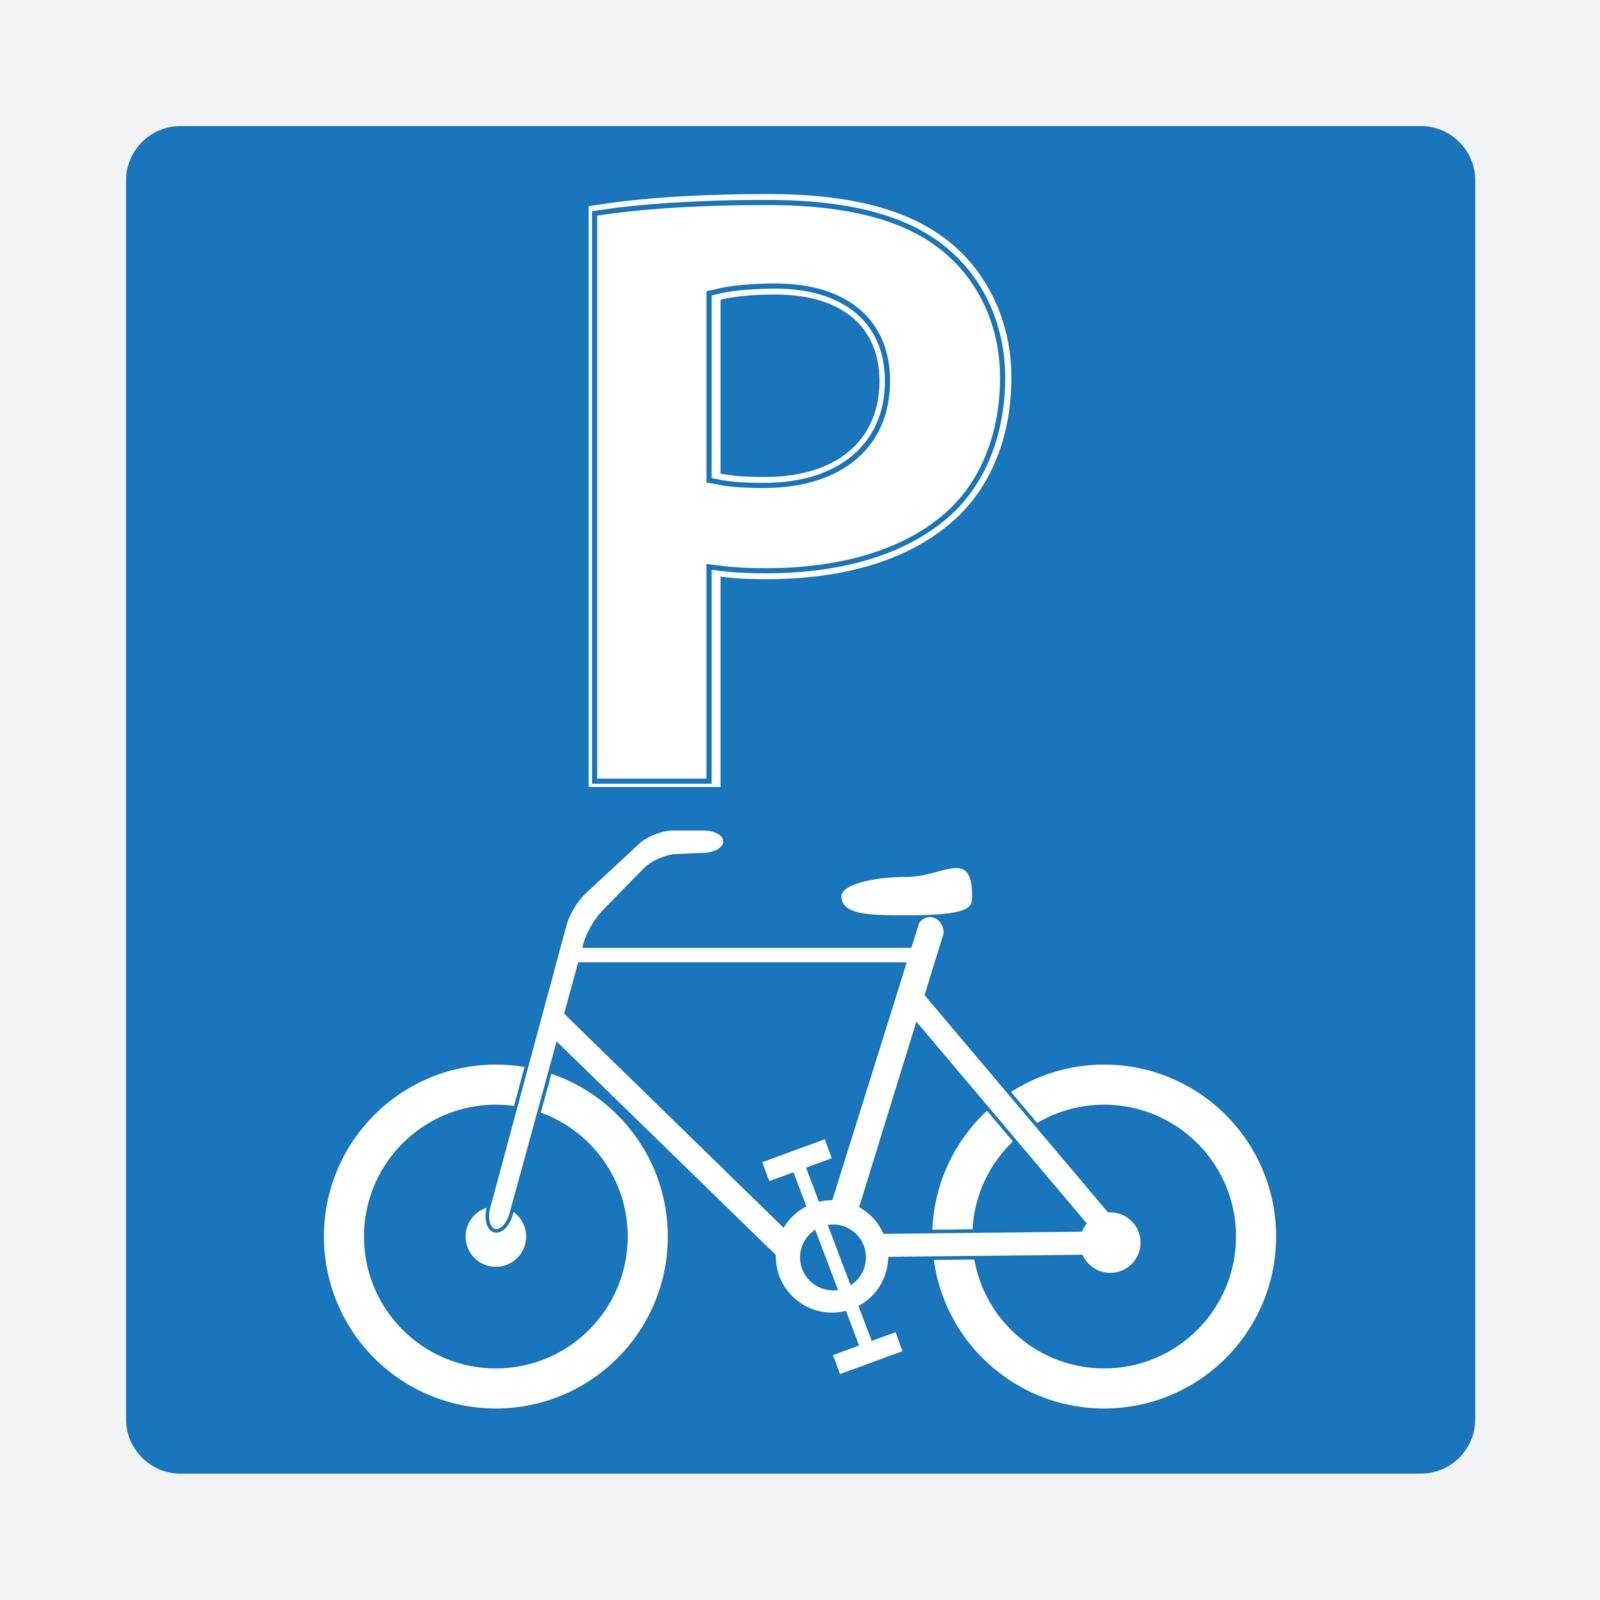 Bicycle parking sign by Kheat